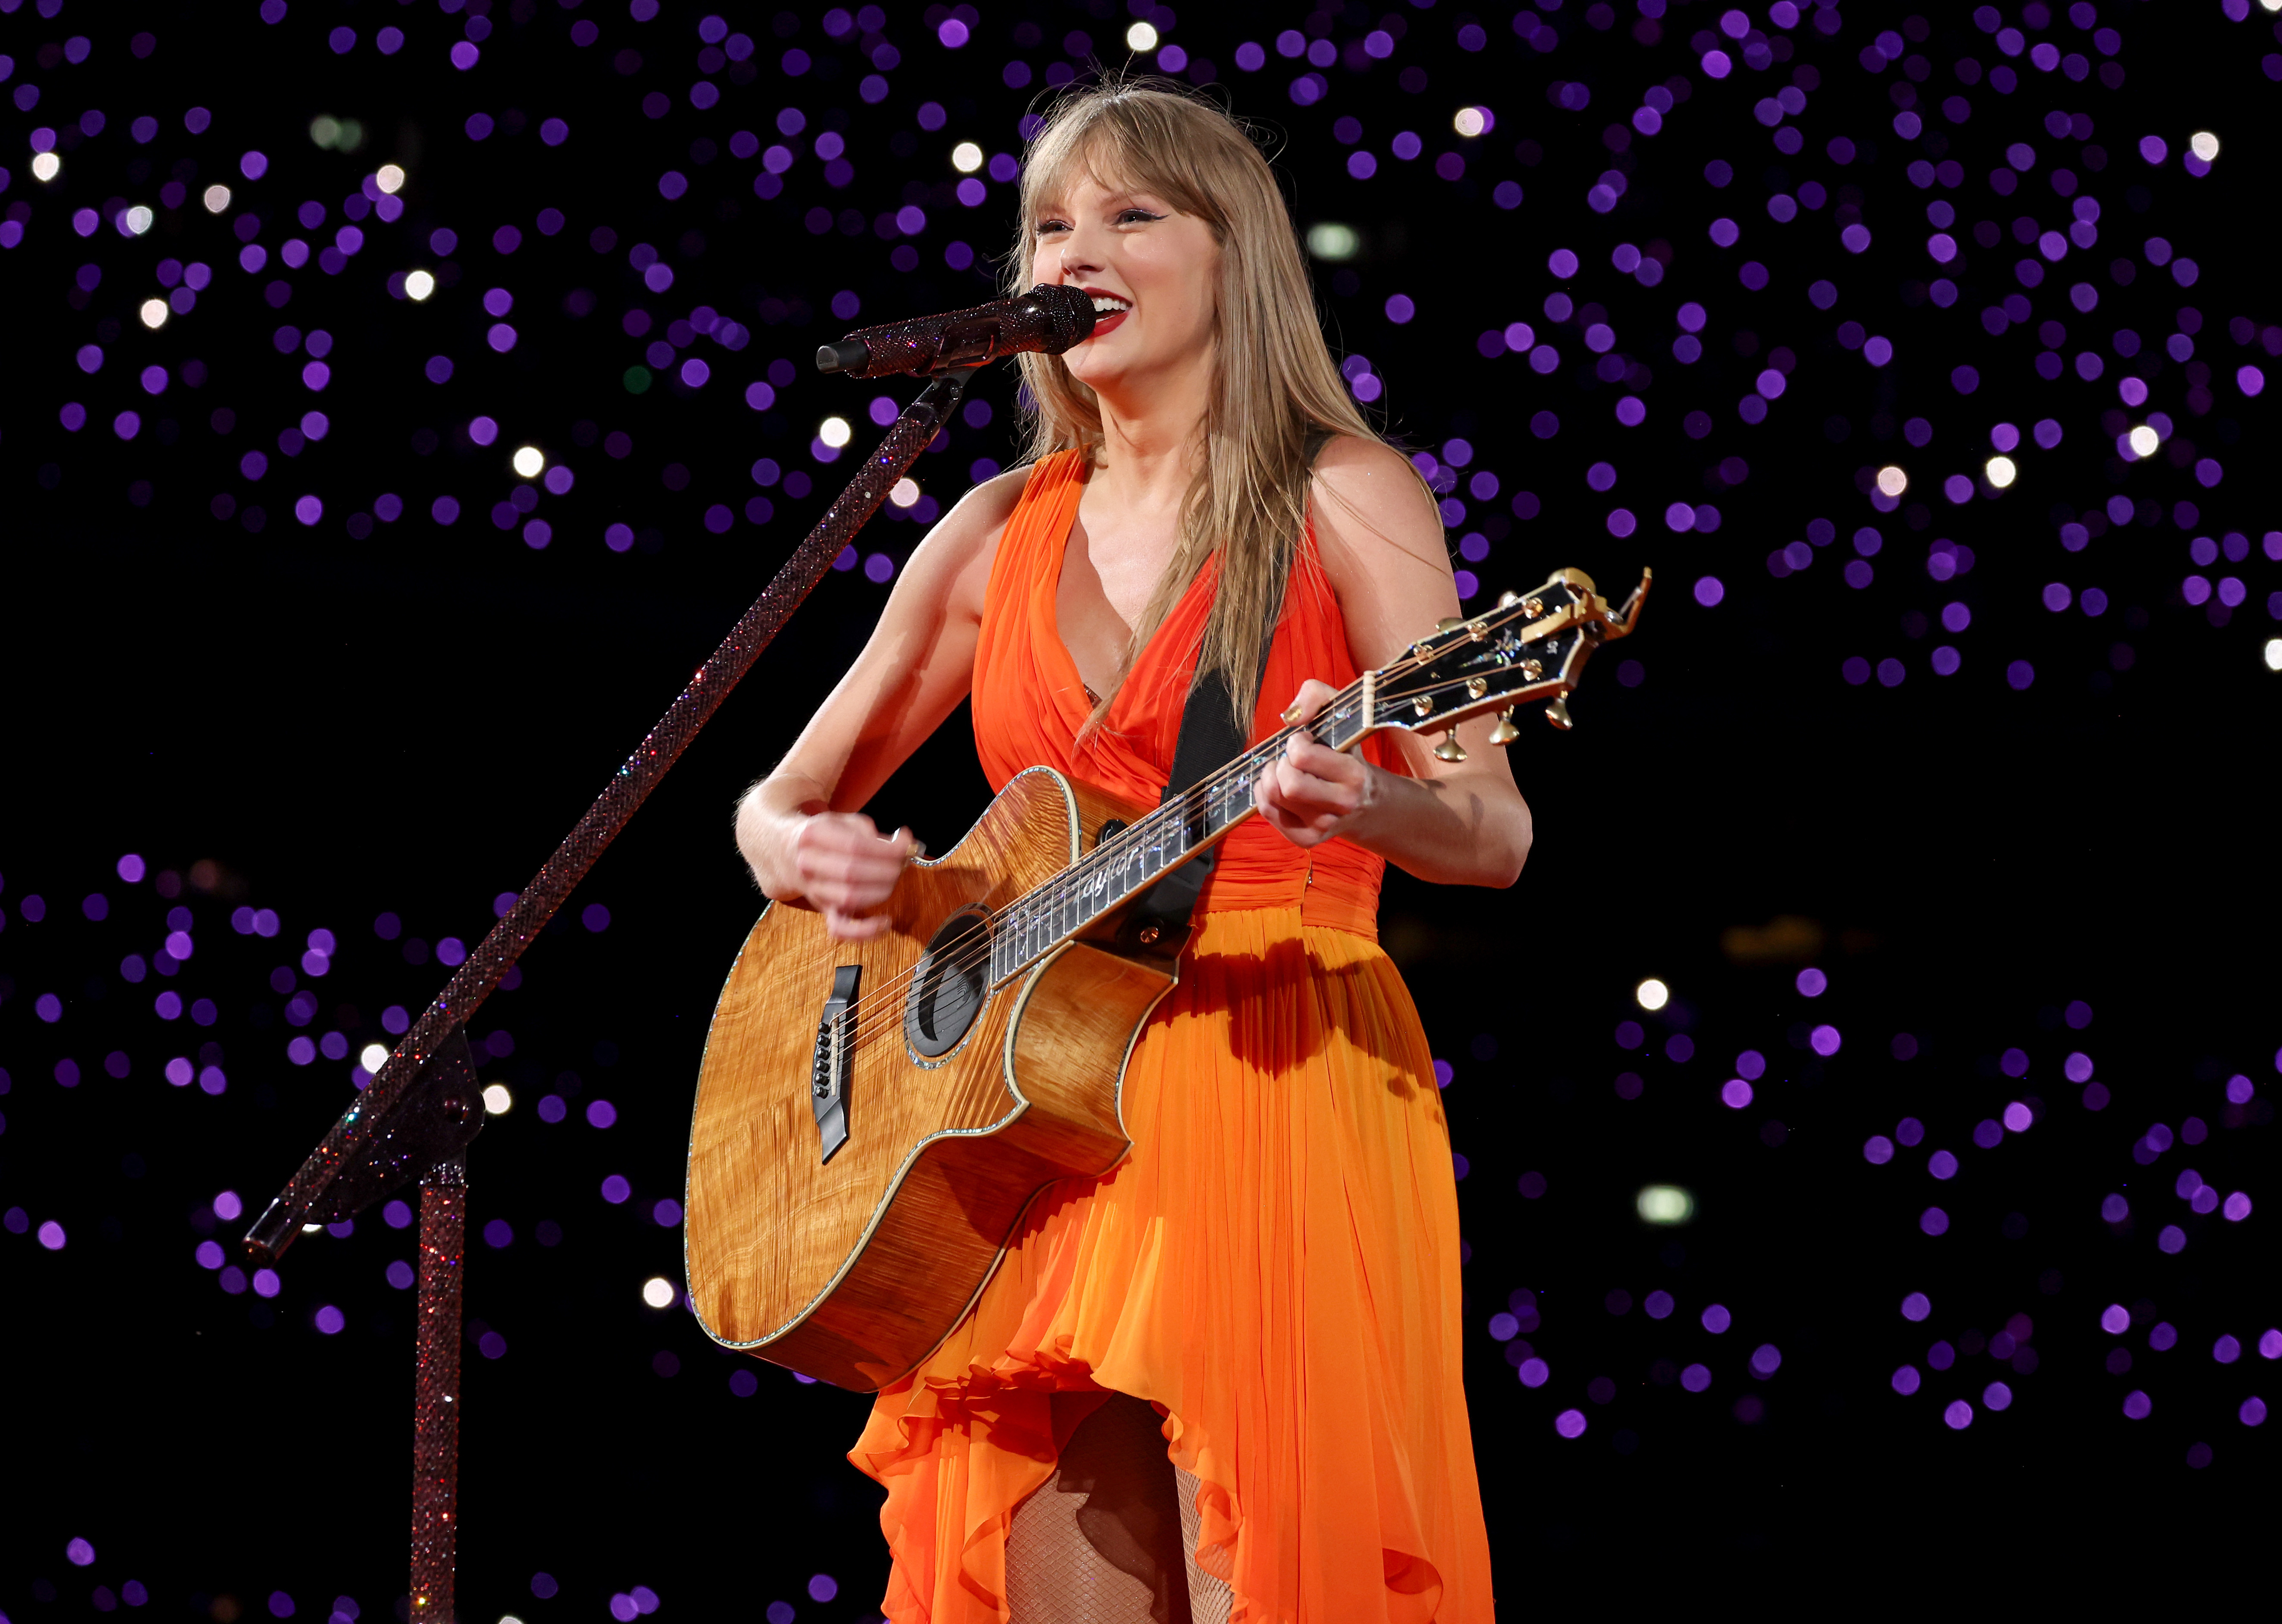 Taylor Swift performs on stage with a guitar, wearing a flowing, asymmetrical dress. Purple lights create a star-like background